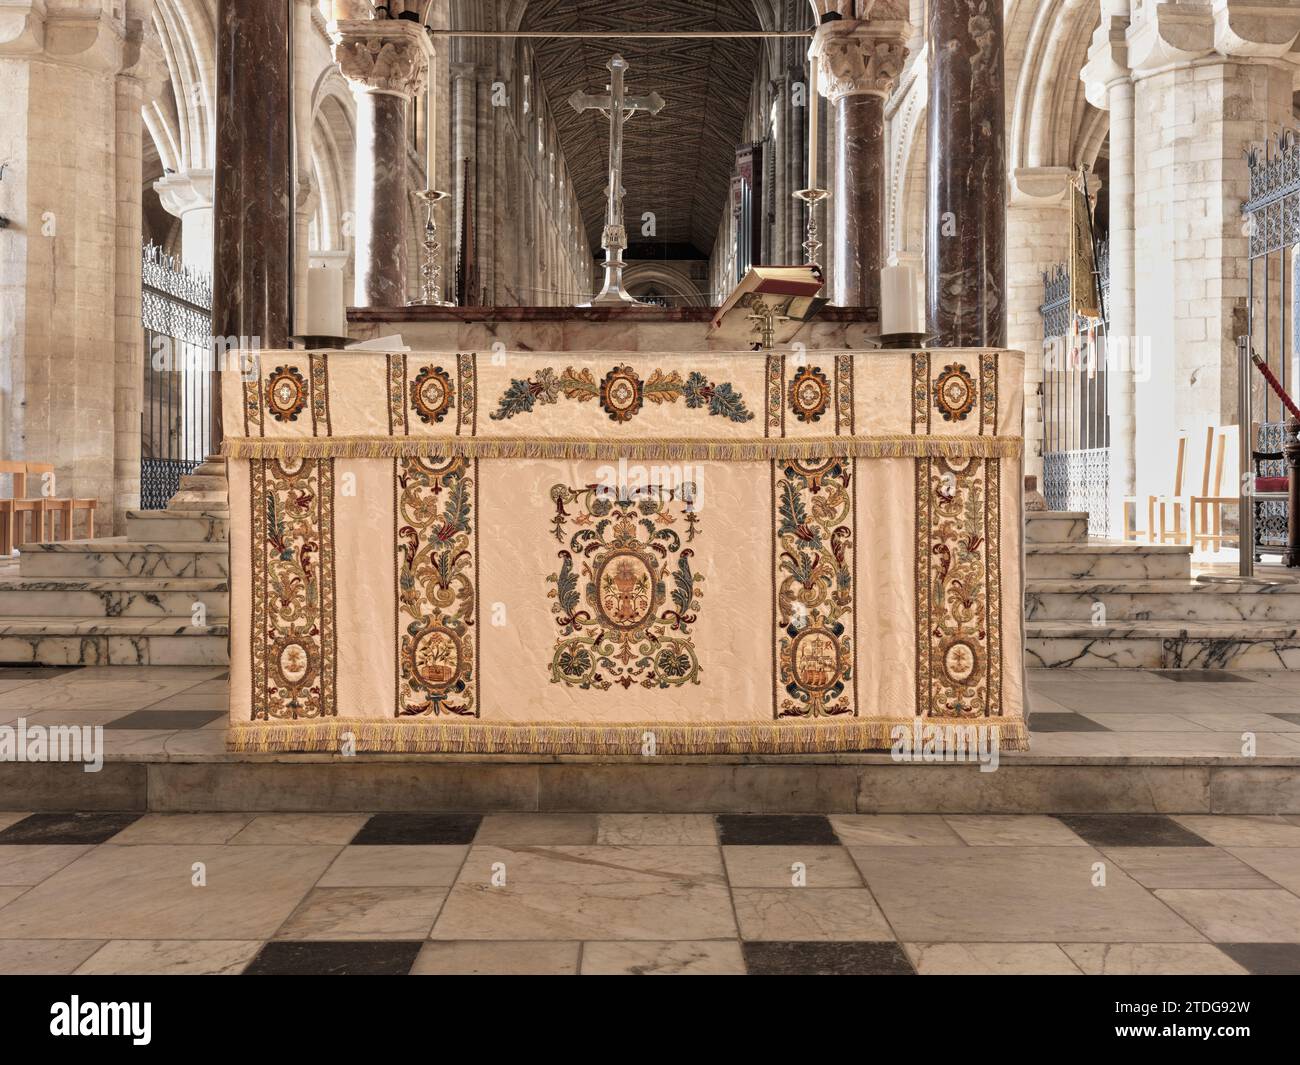 Altar in the apse of the norman (romanesque) built christian cathedral at Peterborough, England. Stock Photo